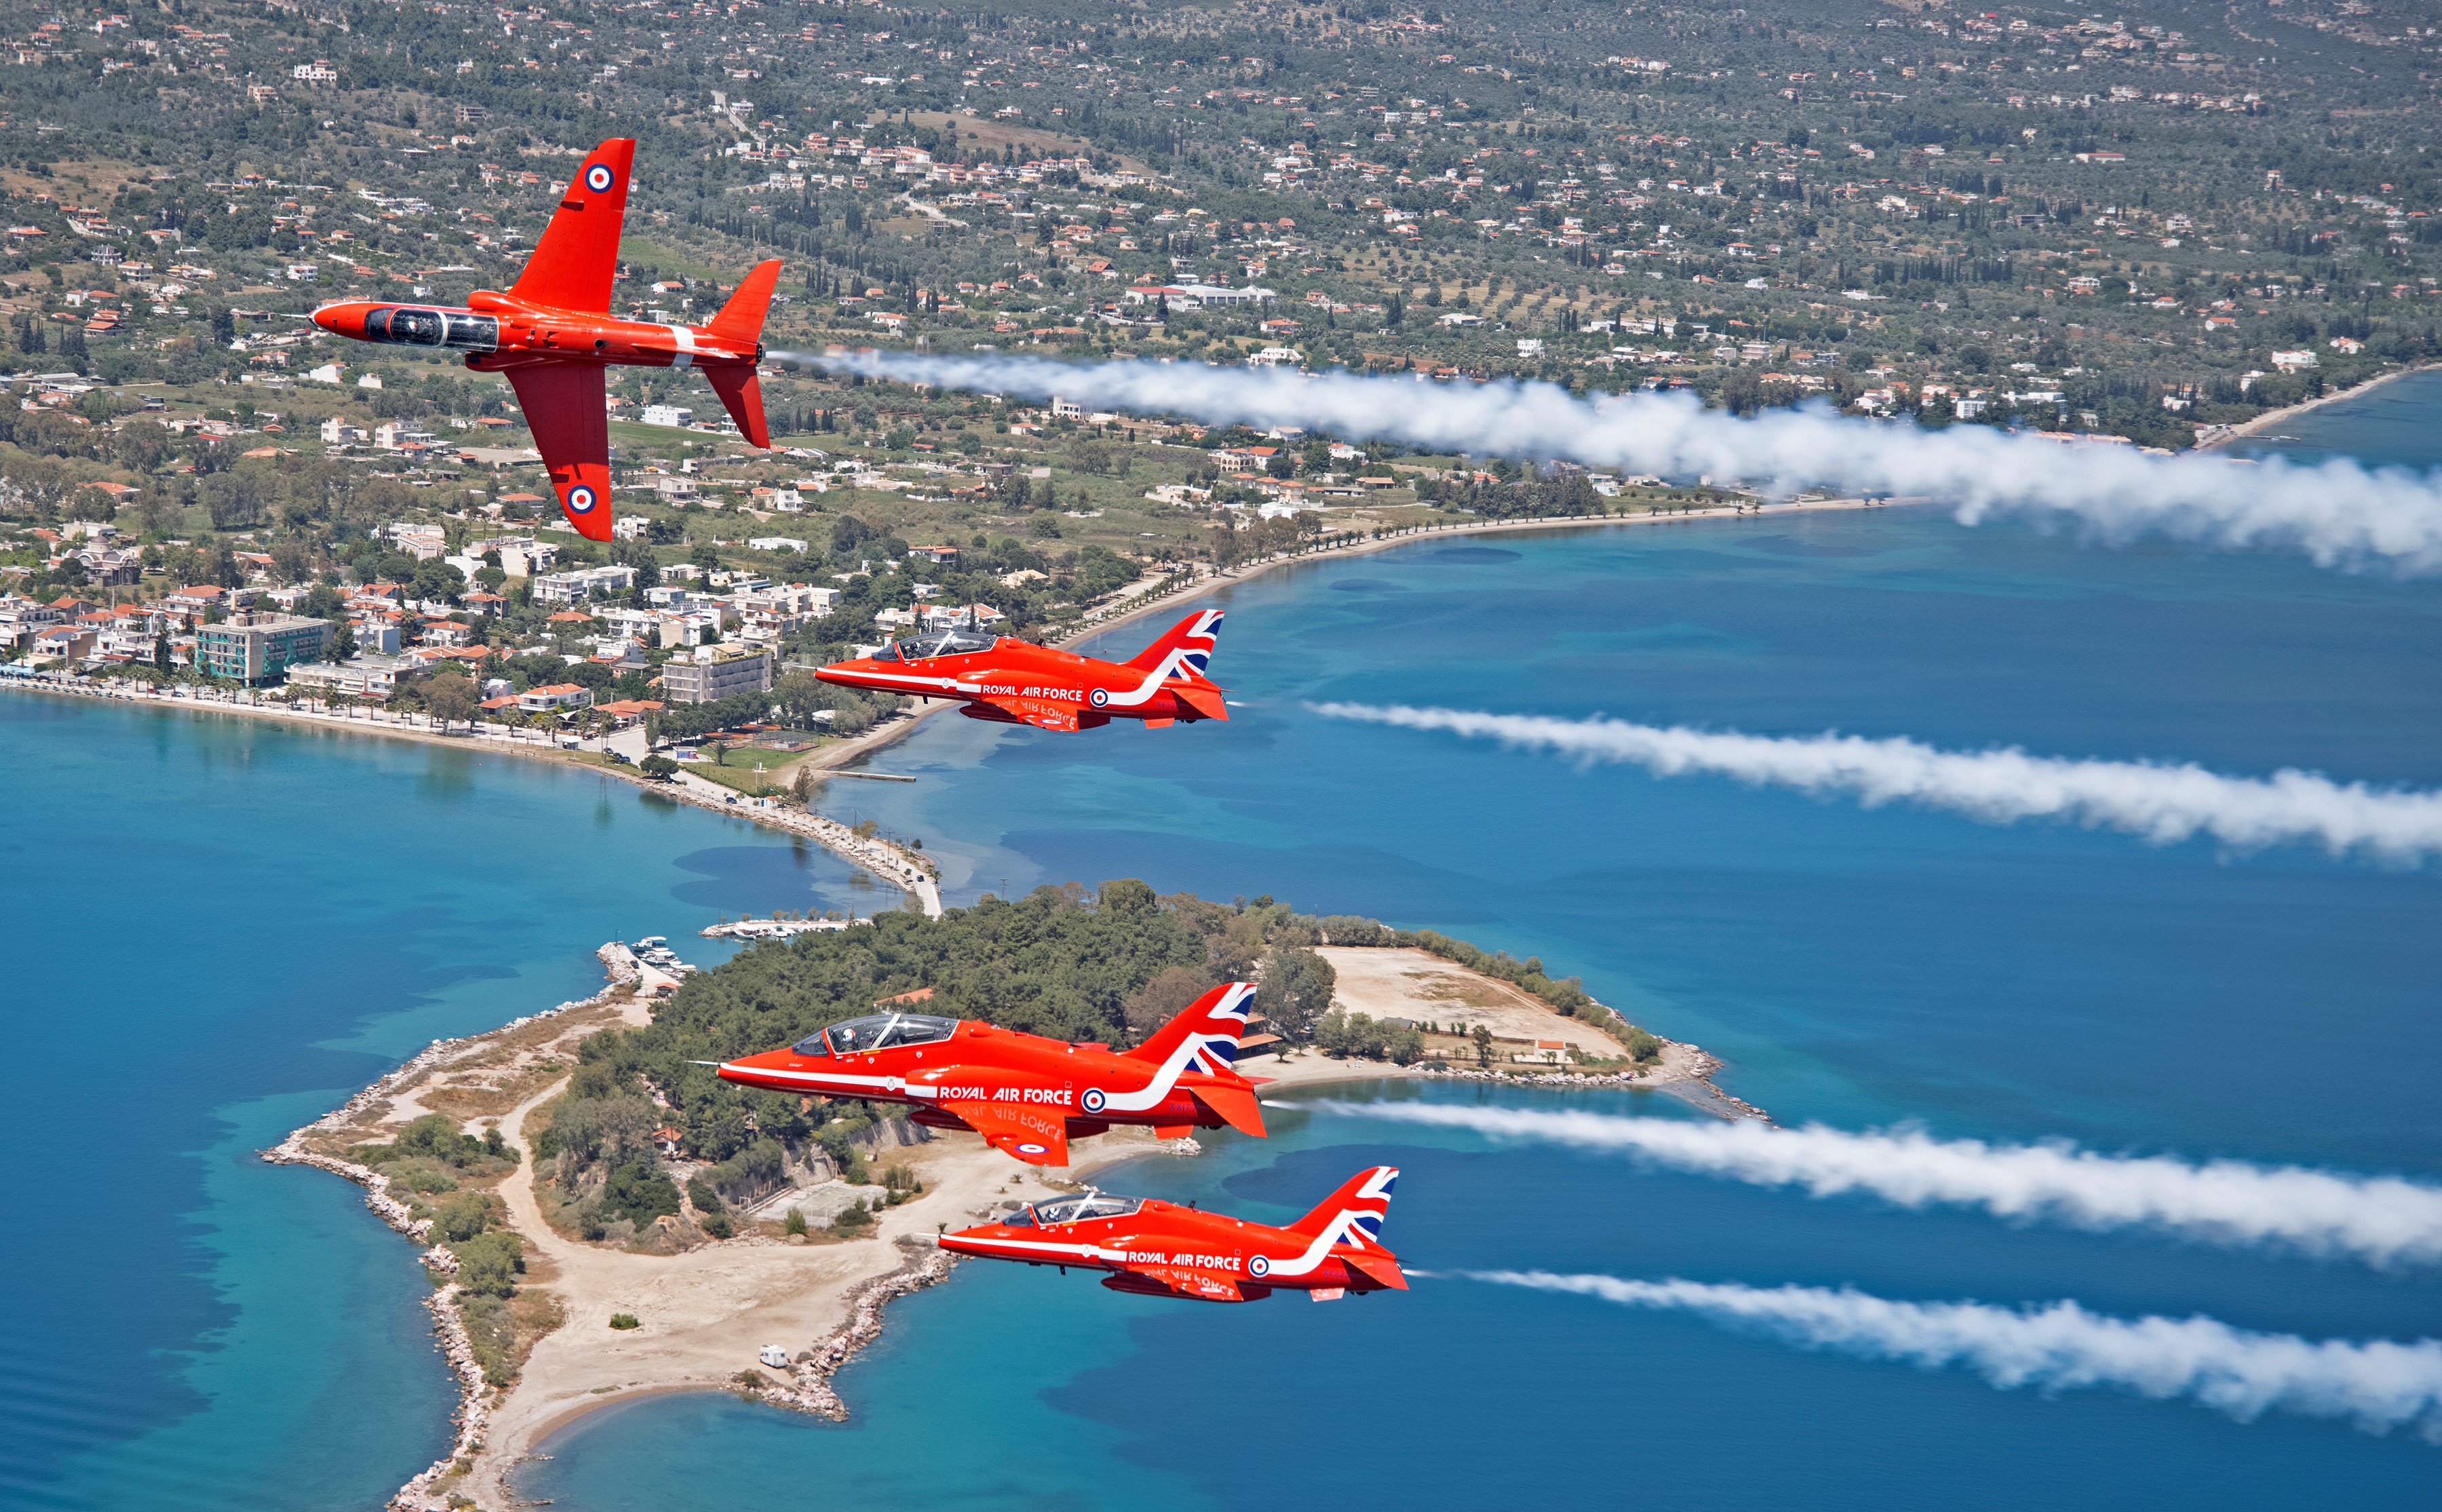 In 2021, the Red Arrows' display featured a combination of new moves and classic shapes.